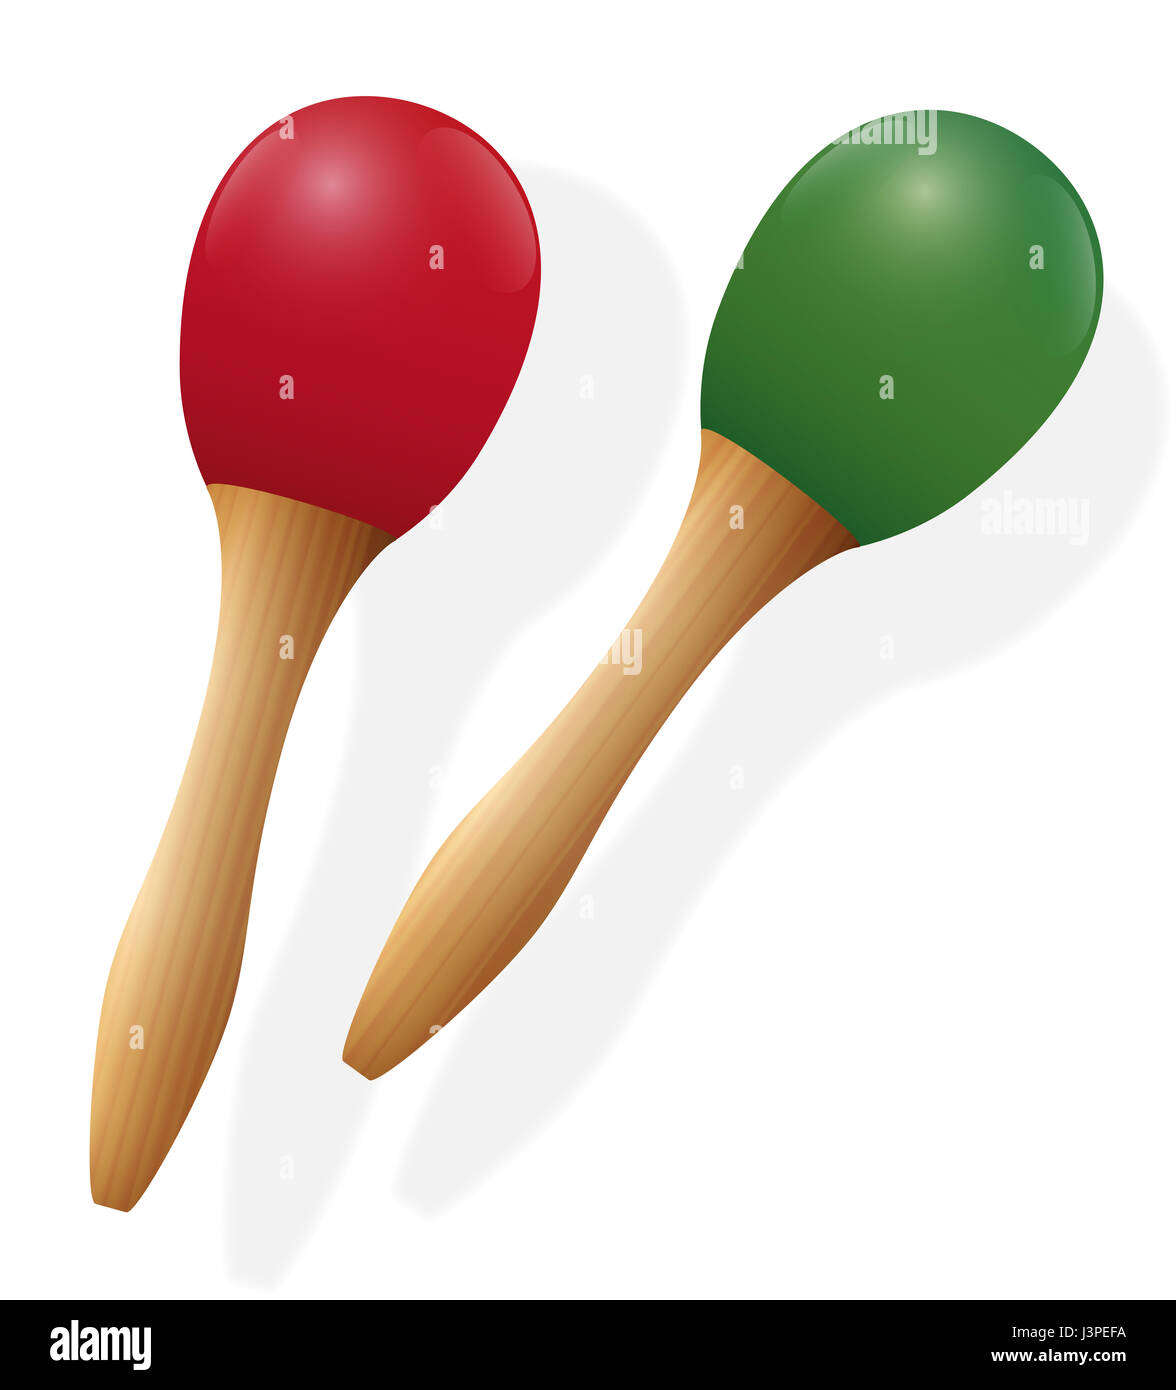 Maracas - a pair of wooden rumba shakers - musical percussion instrument - illustration on white background. Stock Photo